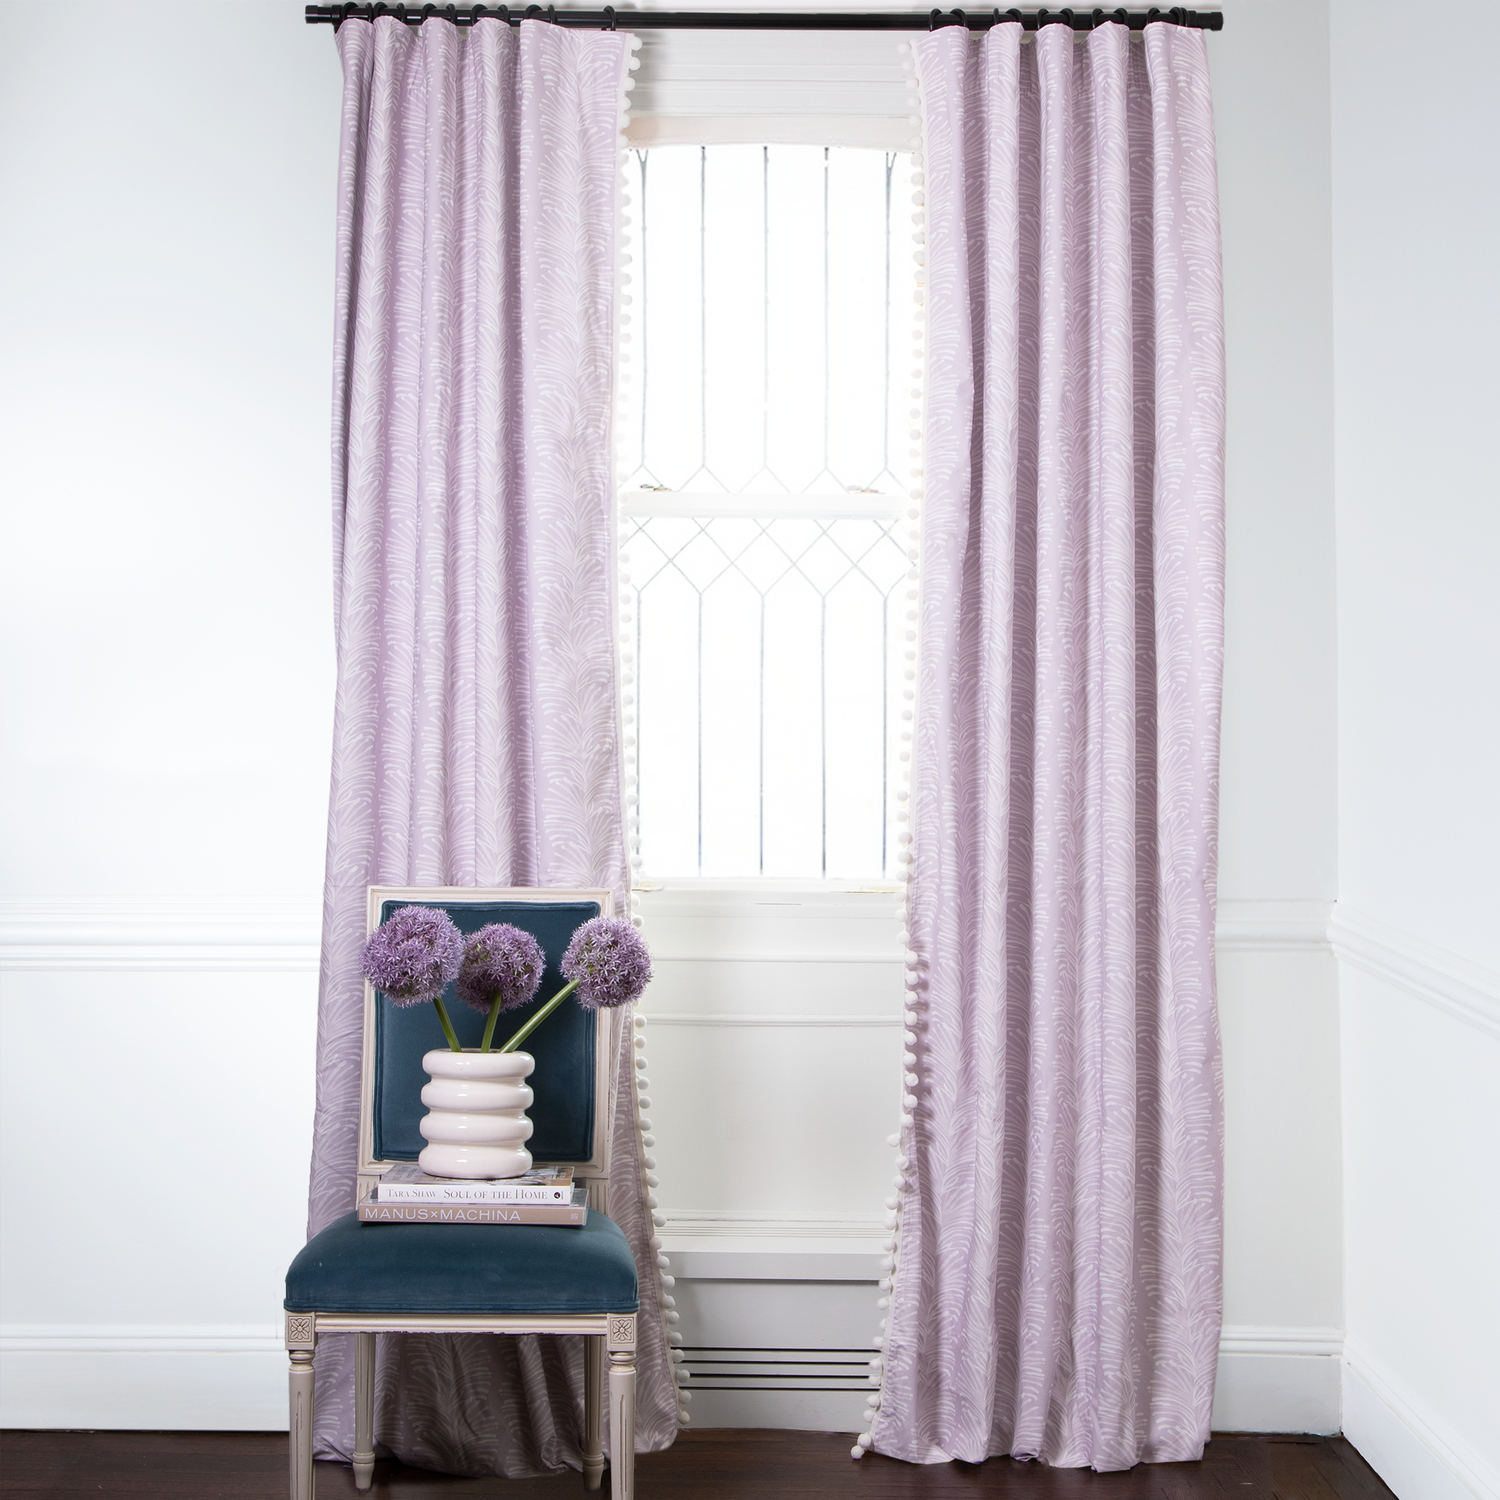 Lavender Botanical Stripe Printed curtains with White Pom Poms on metal rod in front of an illuminated window with Navy Velvet chair with Purple Flowers in white vase on top of two stacked books